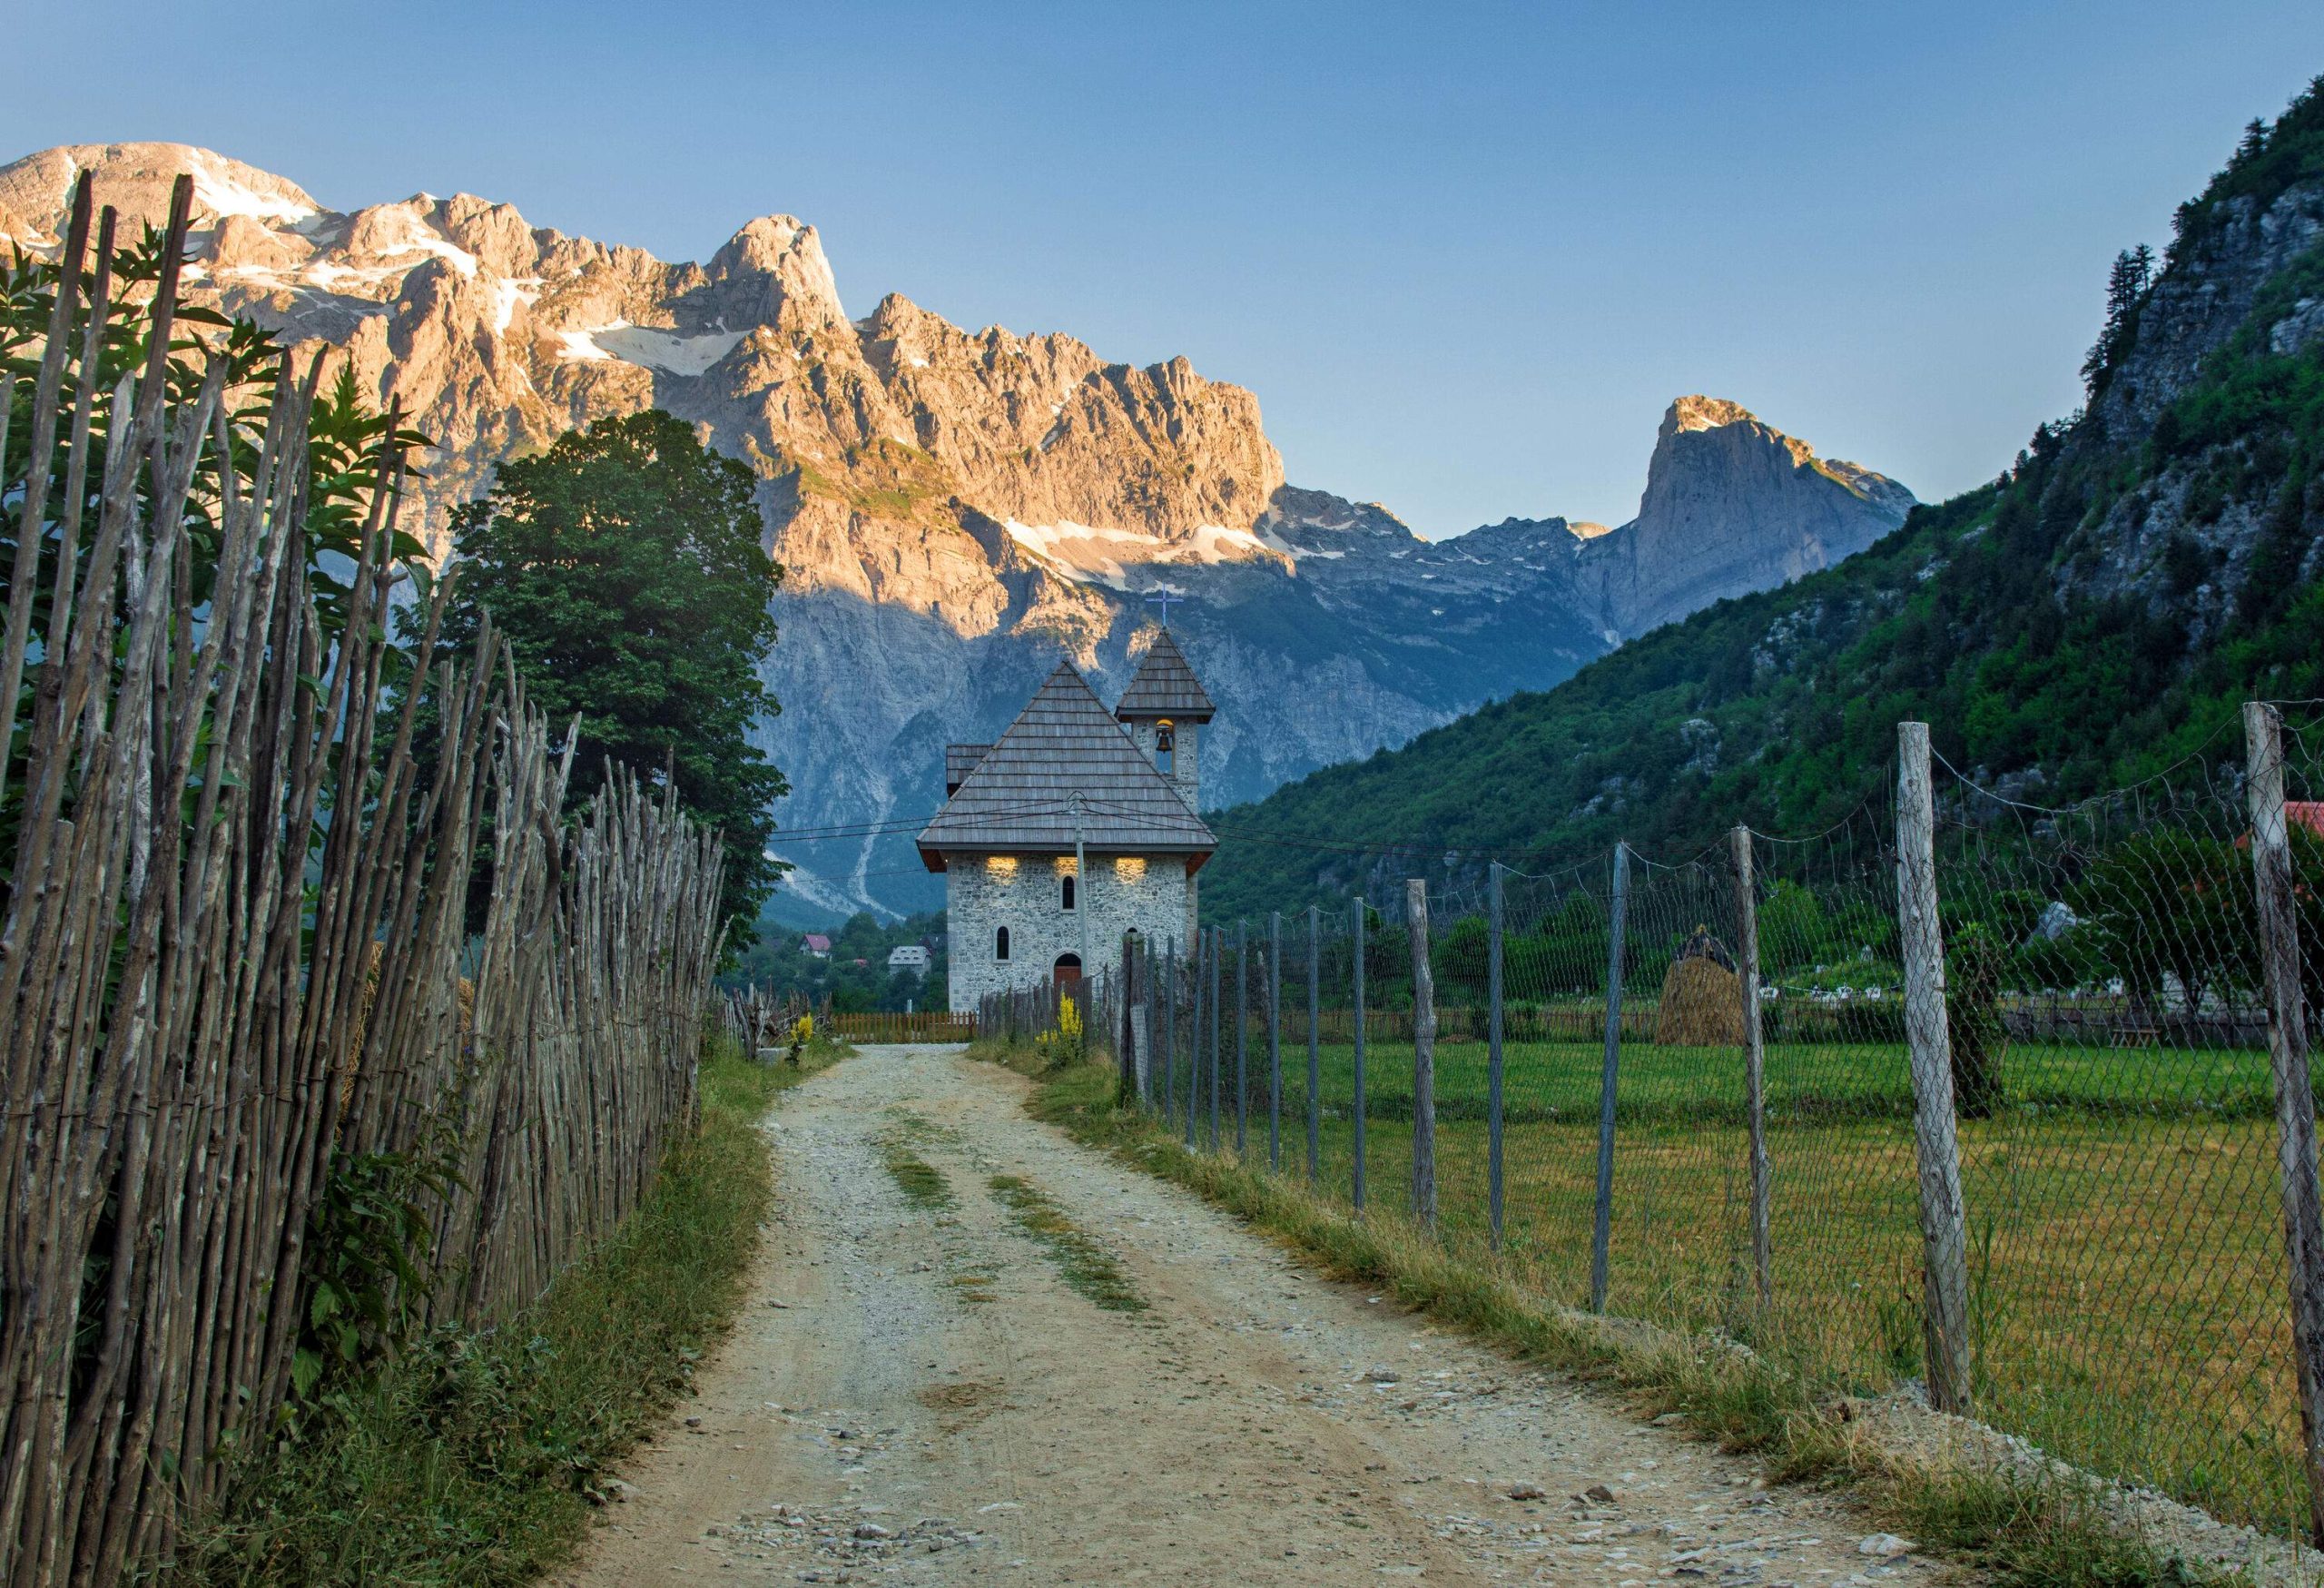 An unpaved road guarded by fences headed towards a tiny church with a steep rock mountain in the background.